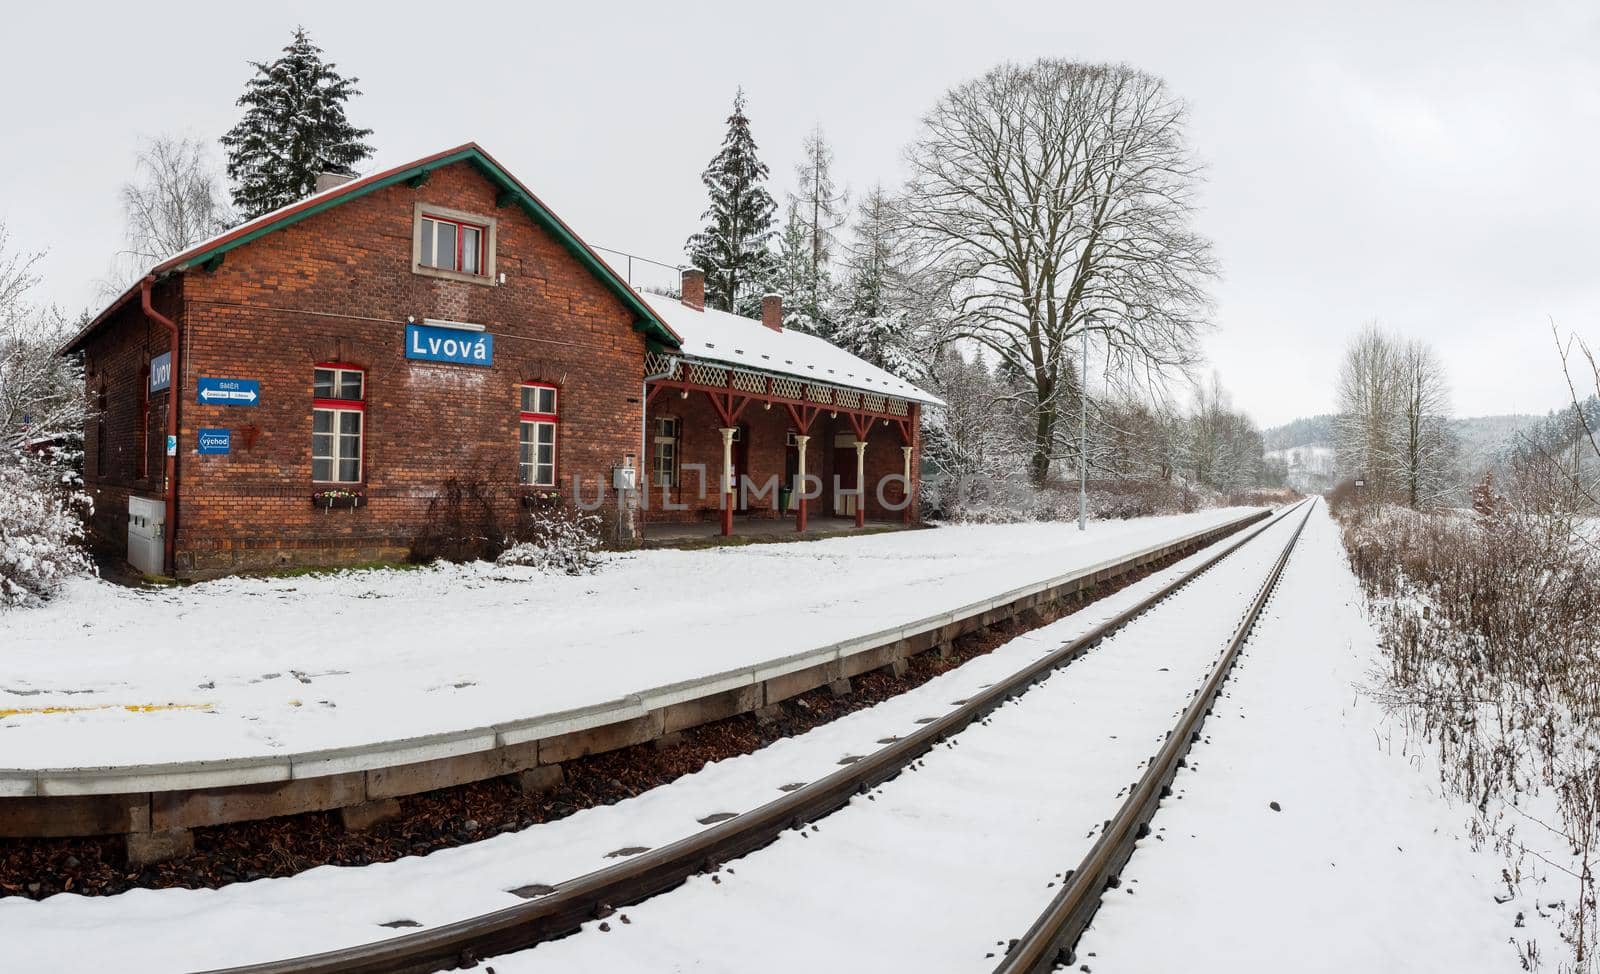 Lvova, Czechia. 10th ov January 2021.  Historic single-track train station covered with fresh snow during January.